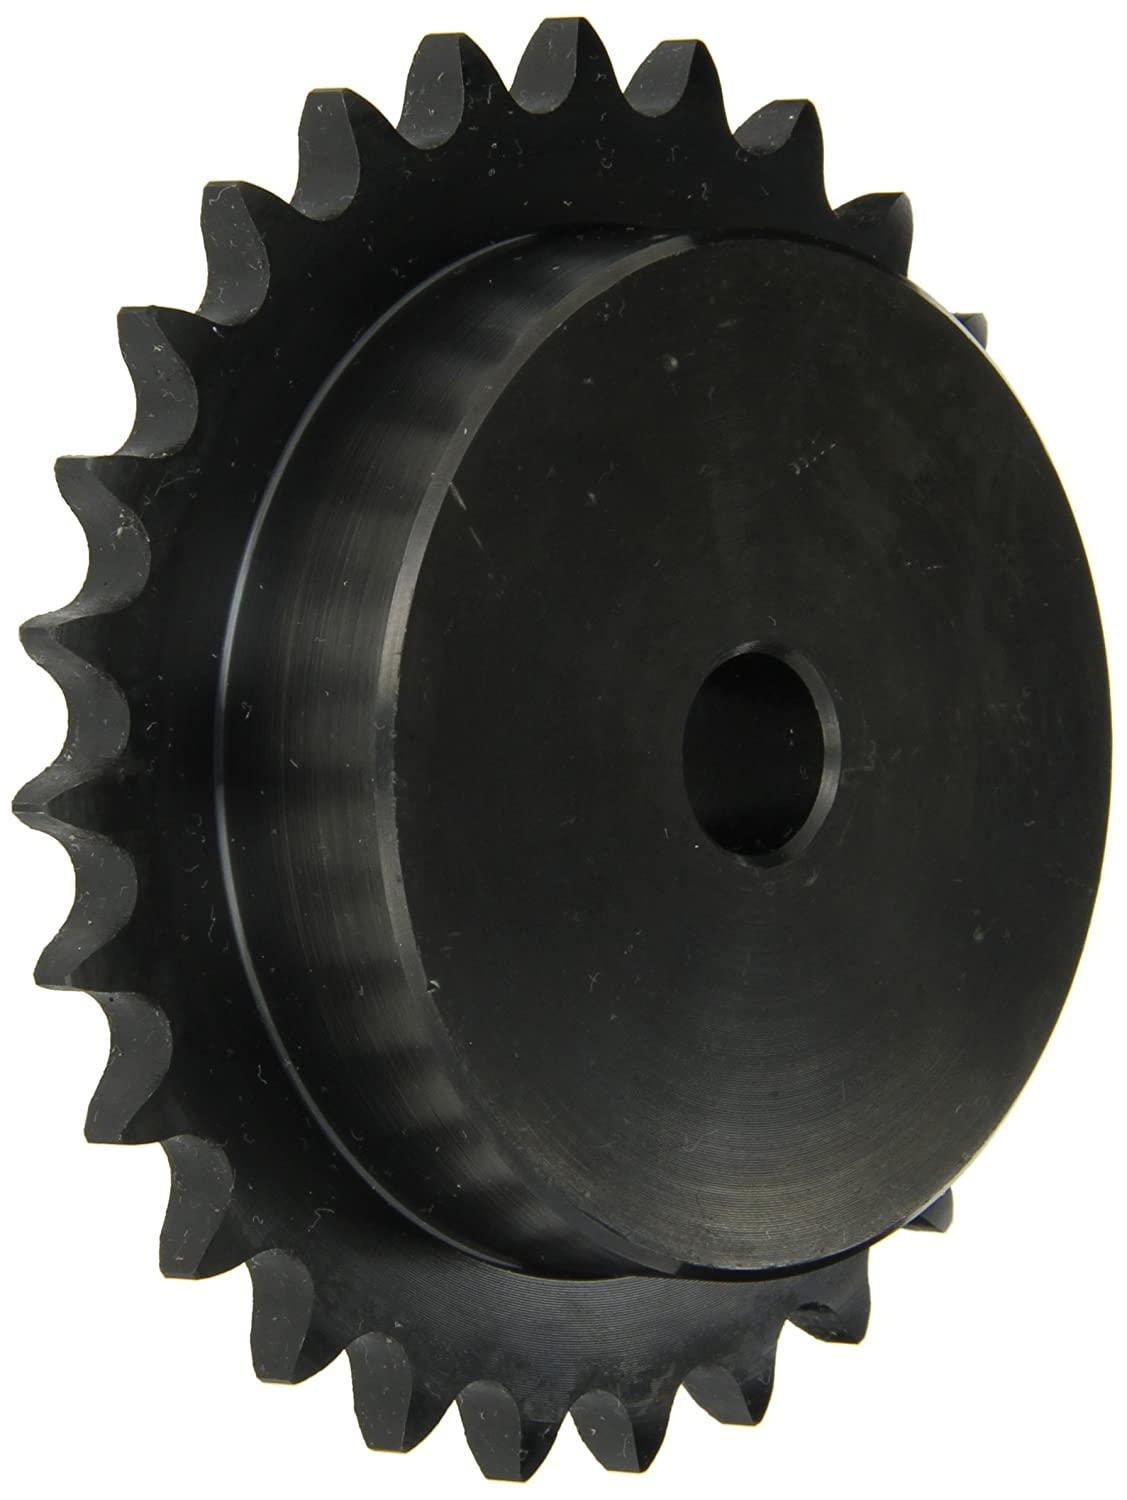 100B22 Roller Chain Sprocket With Stock Bore - Forces Inc